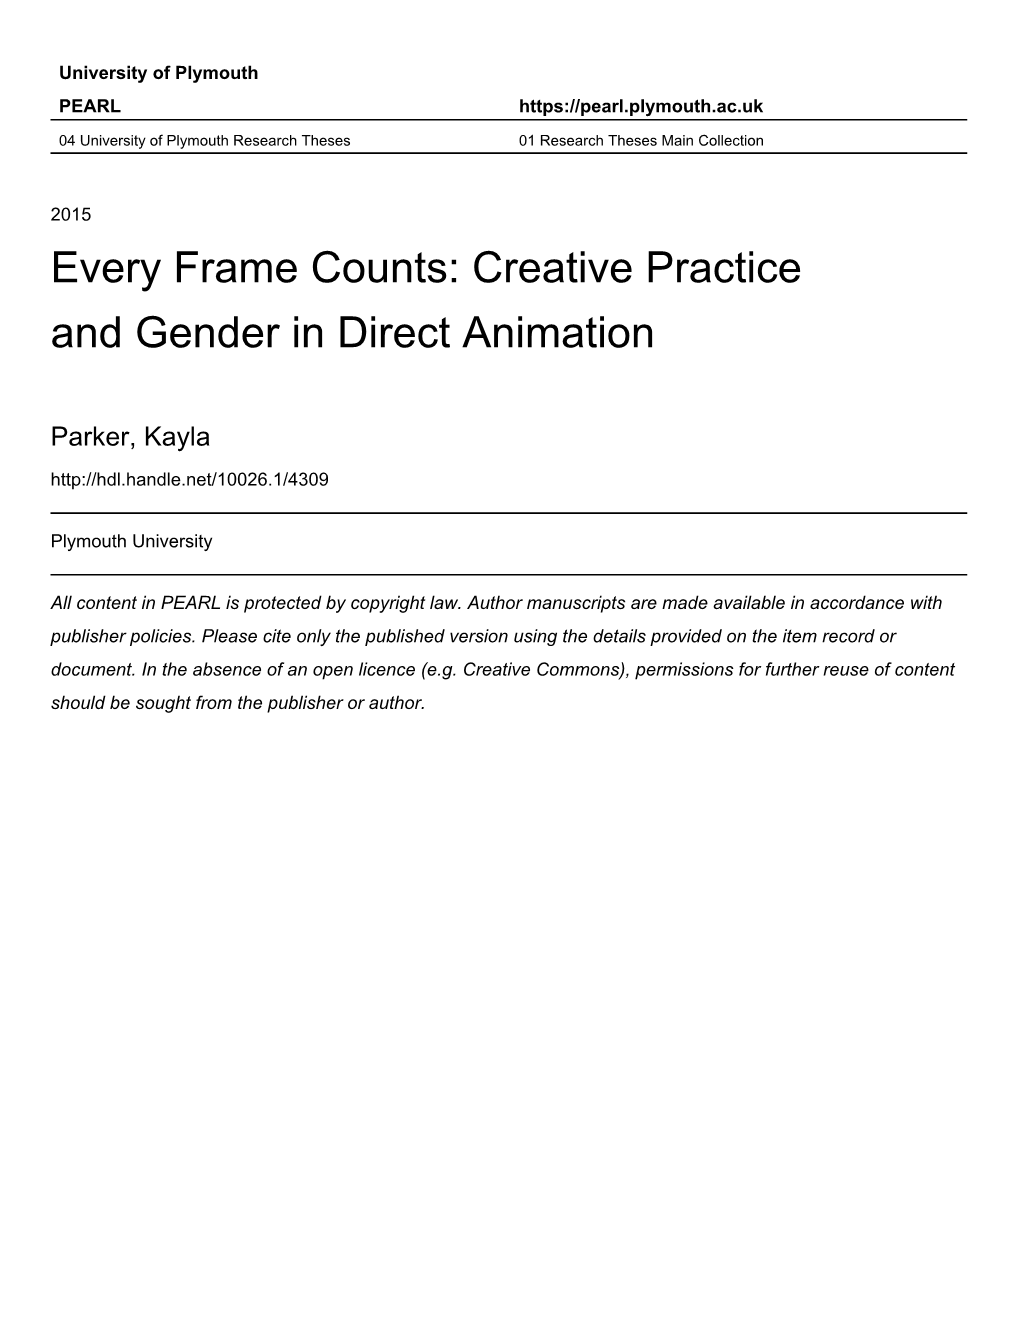 Creatve Practce and Gender in Direct Animaton by Kayla Parker A